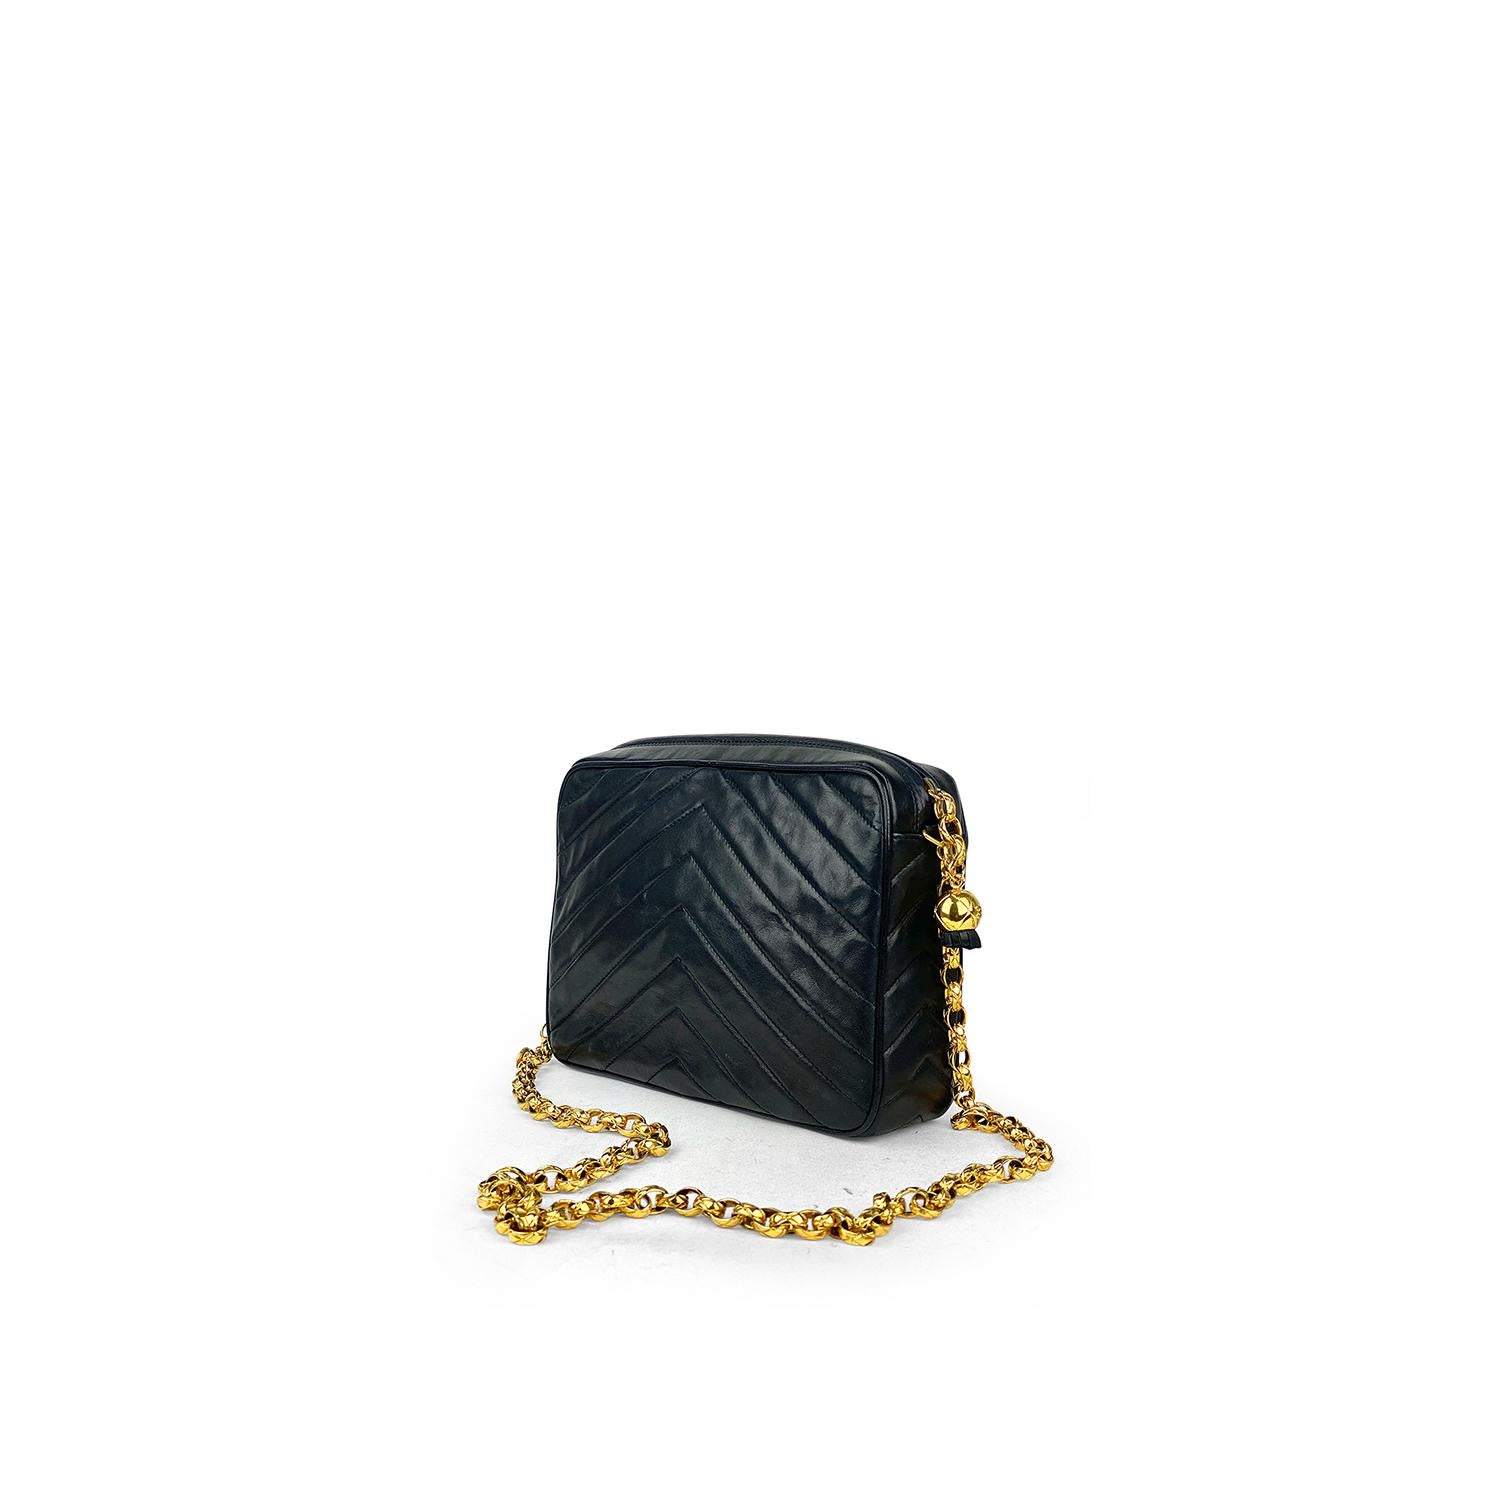 Women's Chanel Camera Black Leather Crossbody Bag For Sale